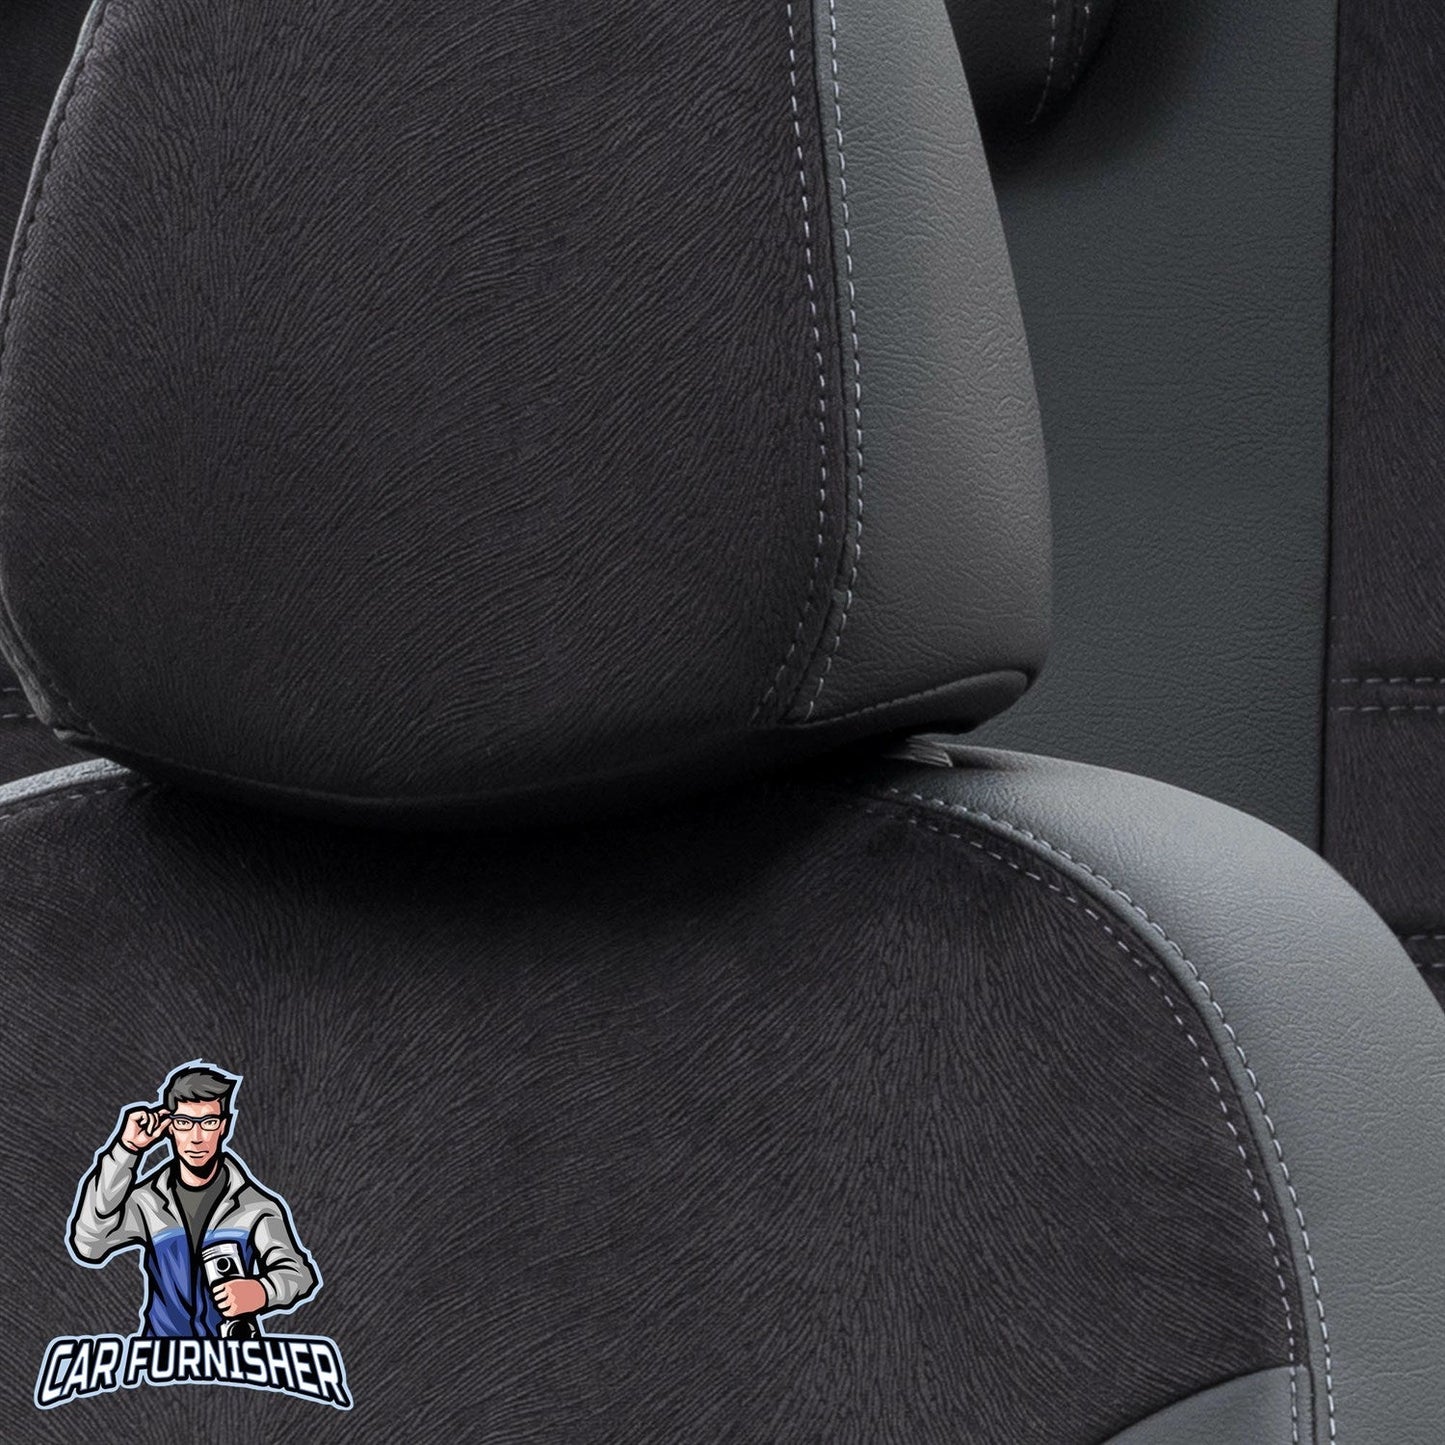 Mazda 626 Seat Cover London Foal Feather Design Black Leather & Foal Feather